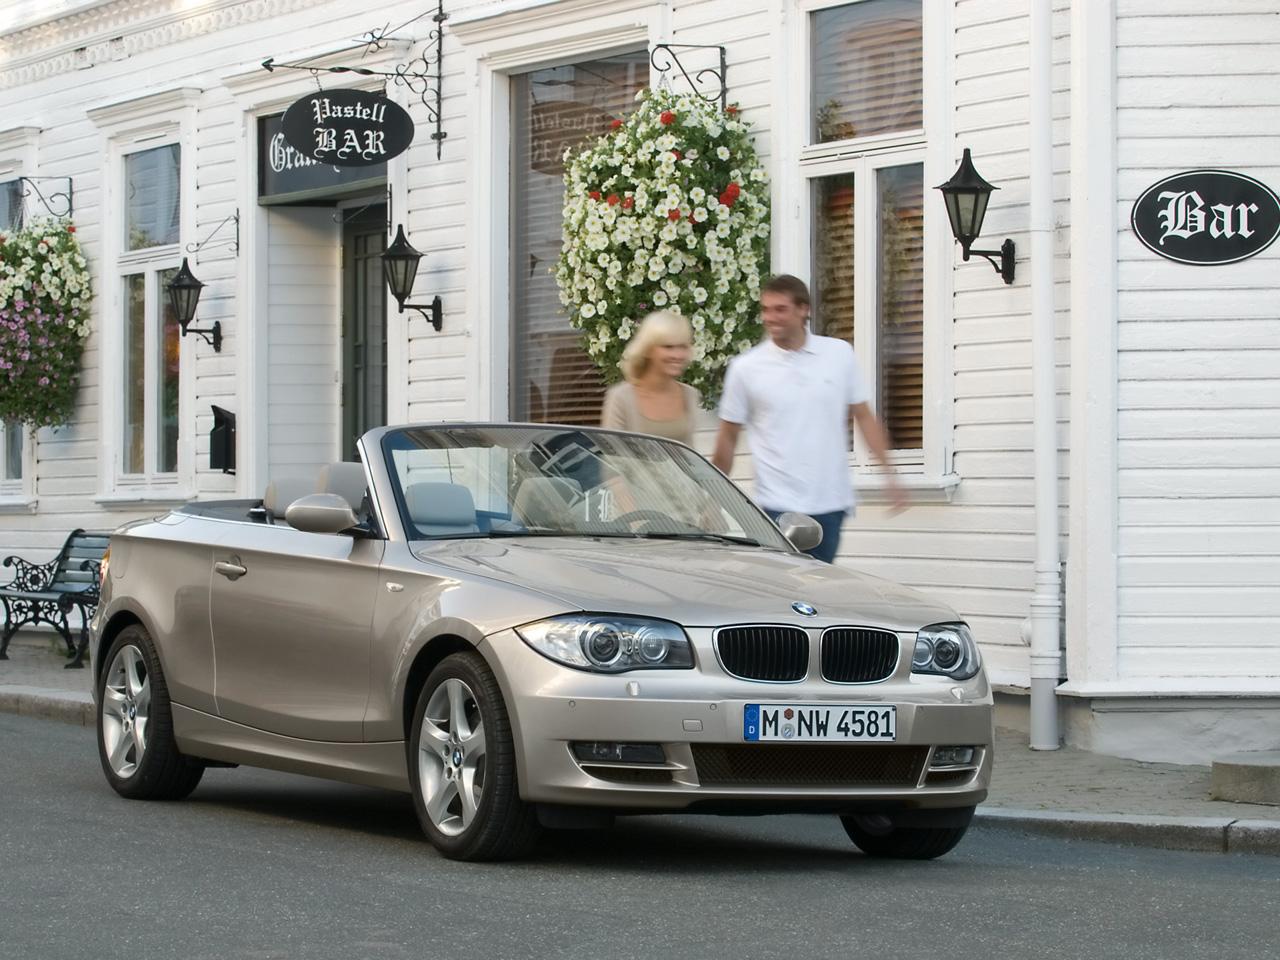 2008-BMW-1-Series-Convertible-Front-Angle-1280x960.jpg